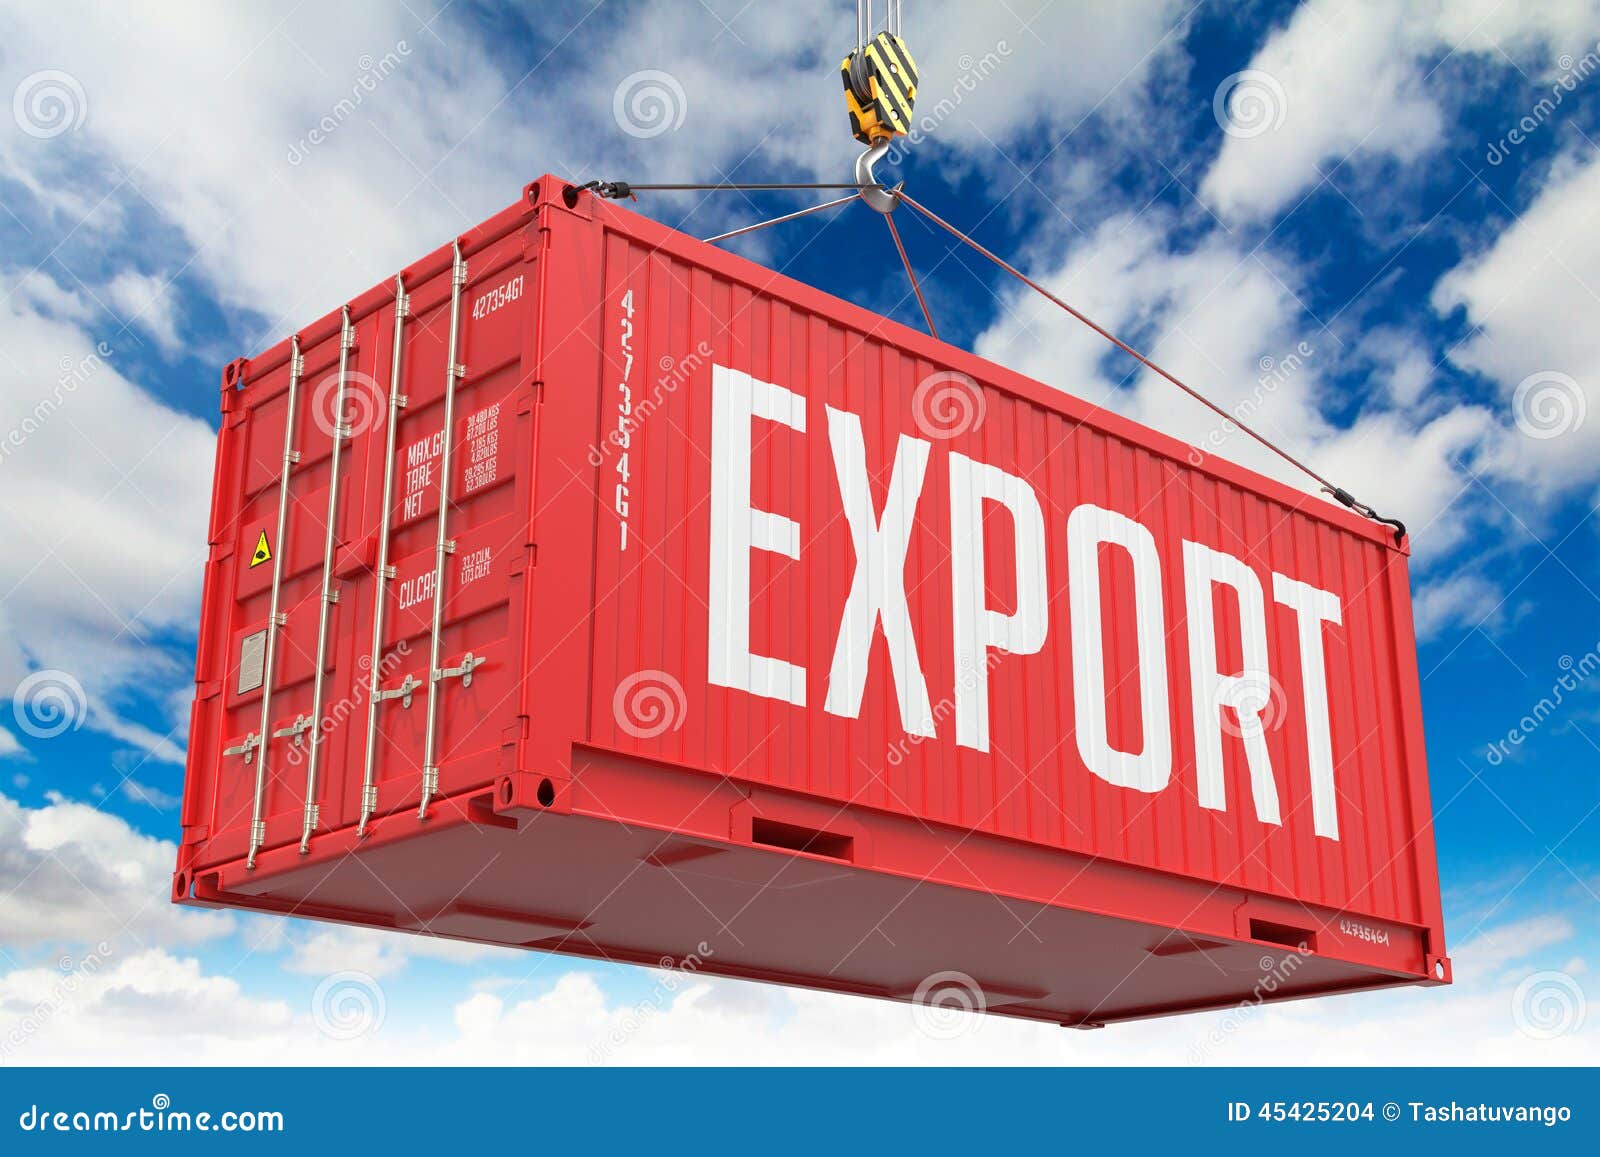 export - red hanging cargo container.